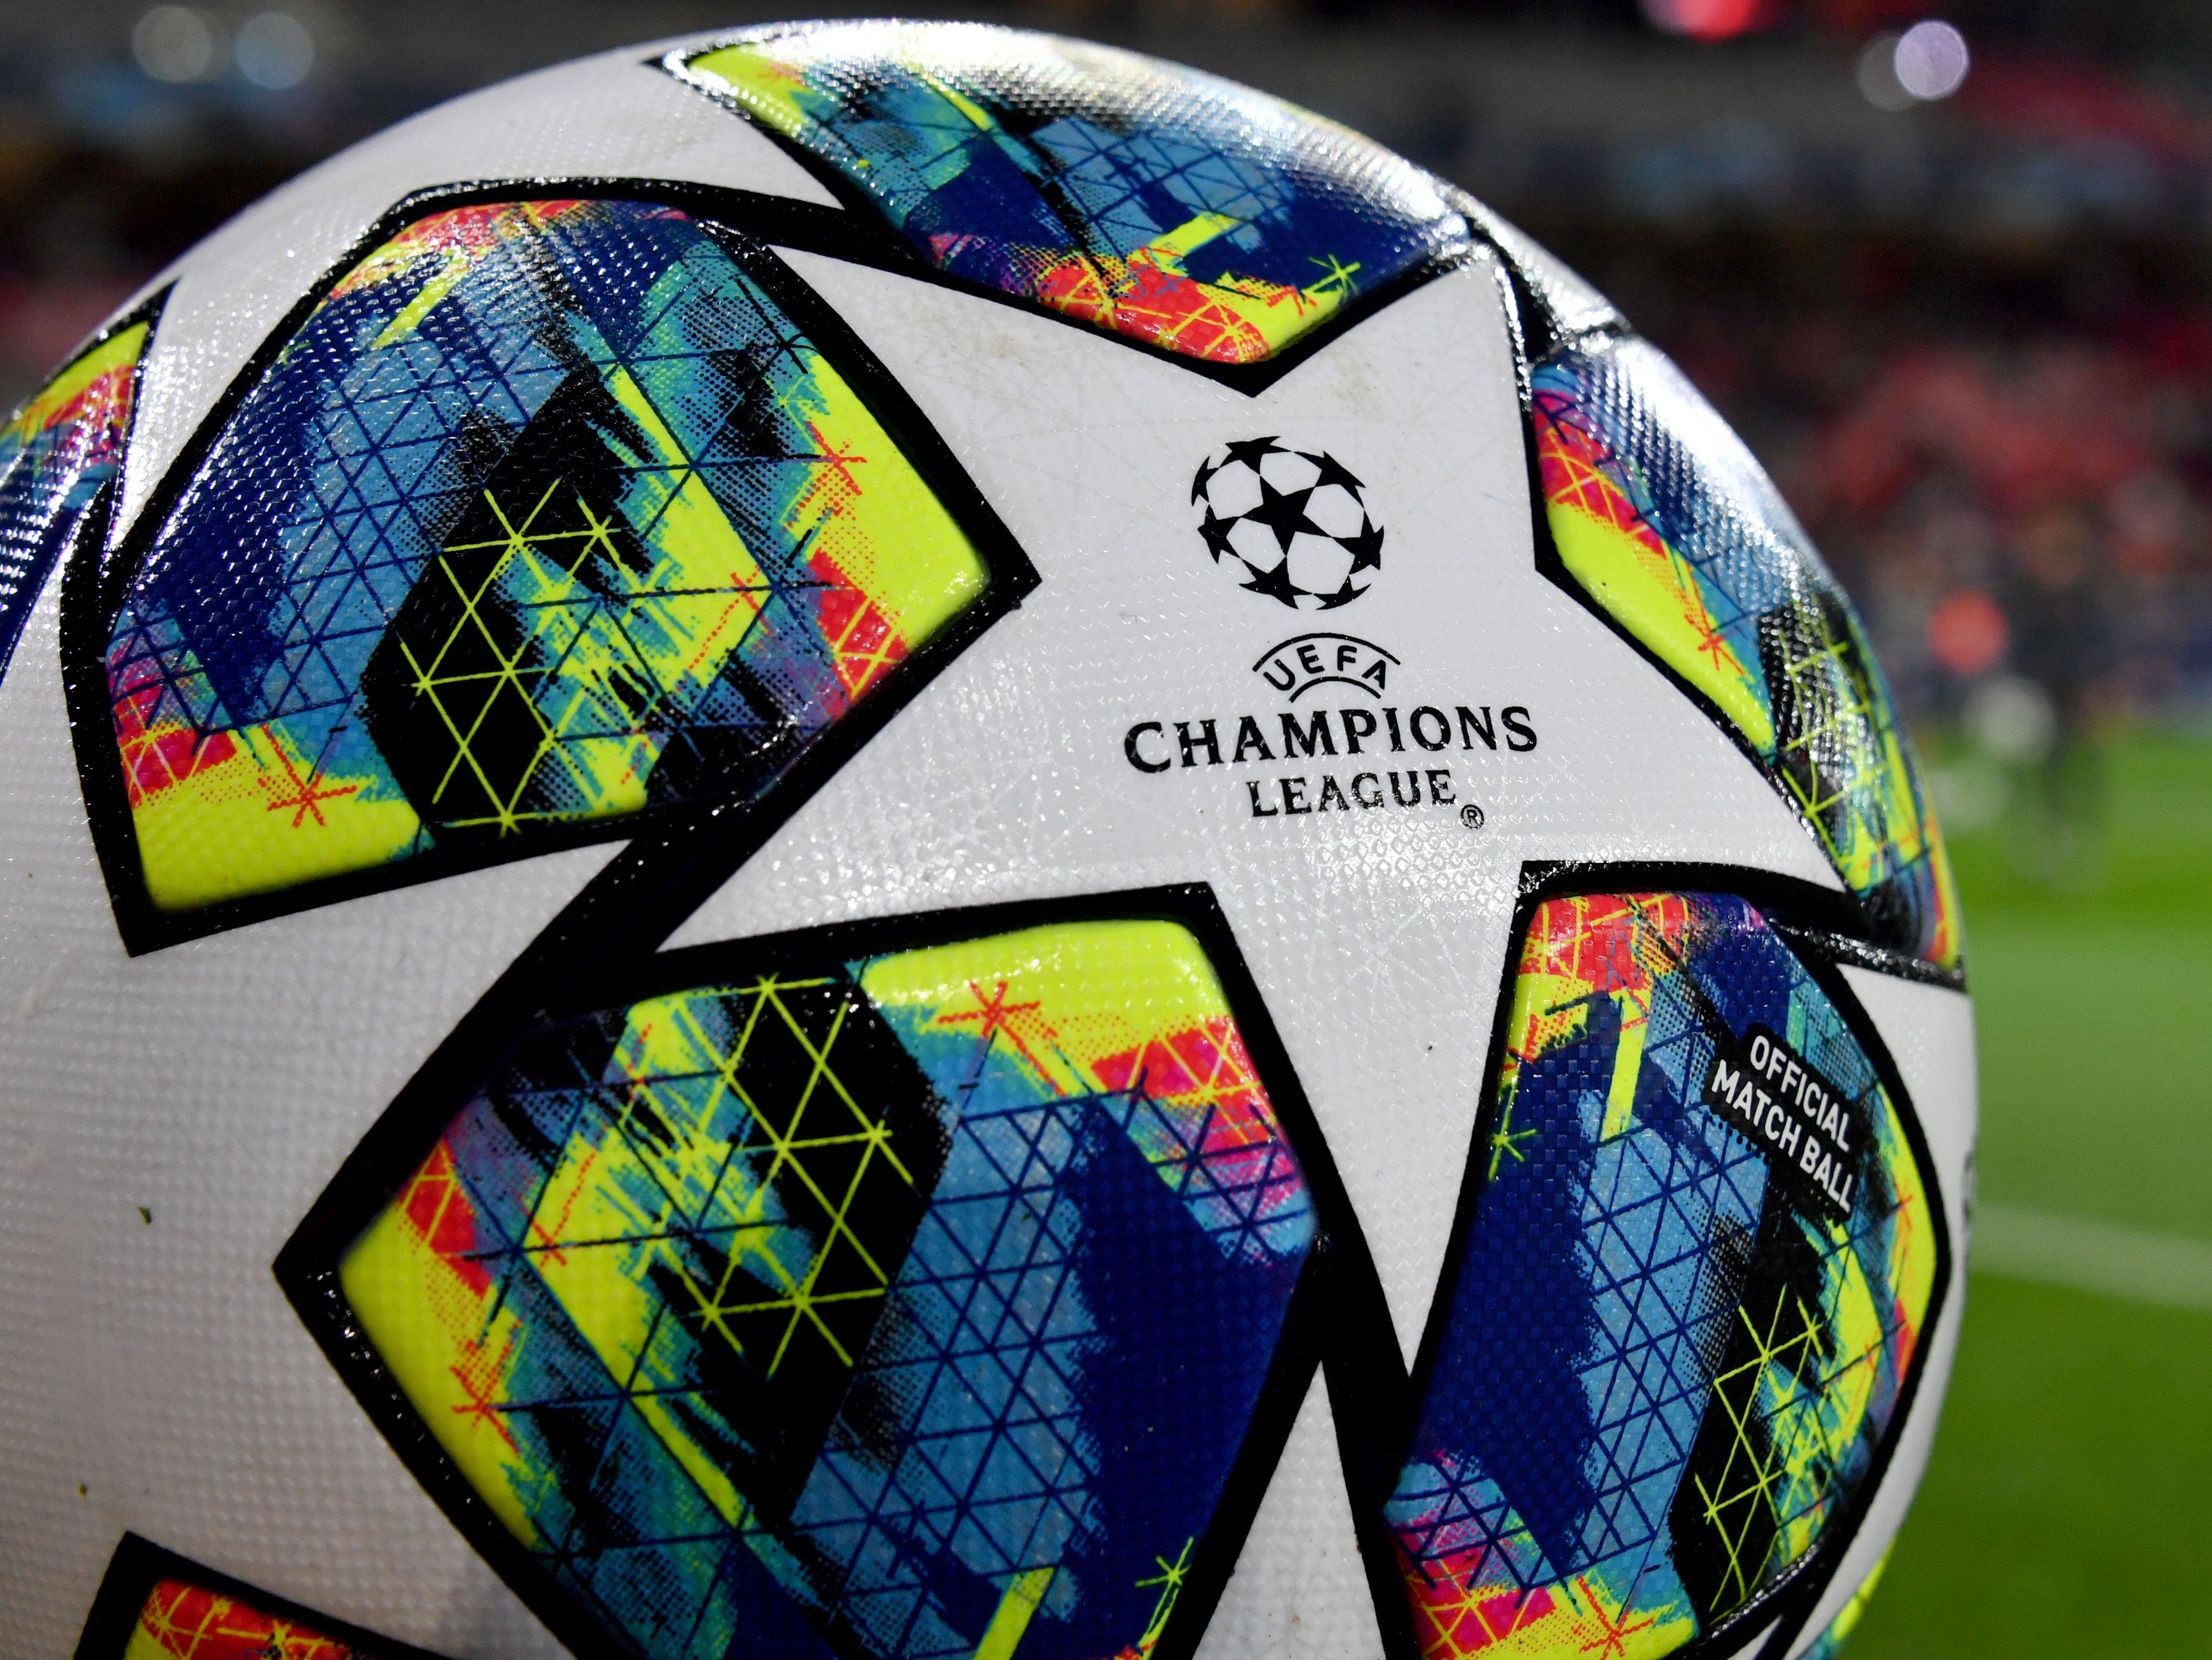 The Champions League currently sees 32 clubs compete in eight four-team groups before knockout rounds begin